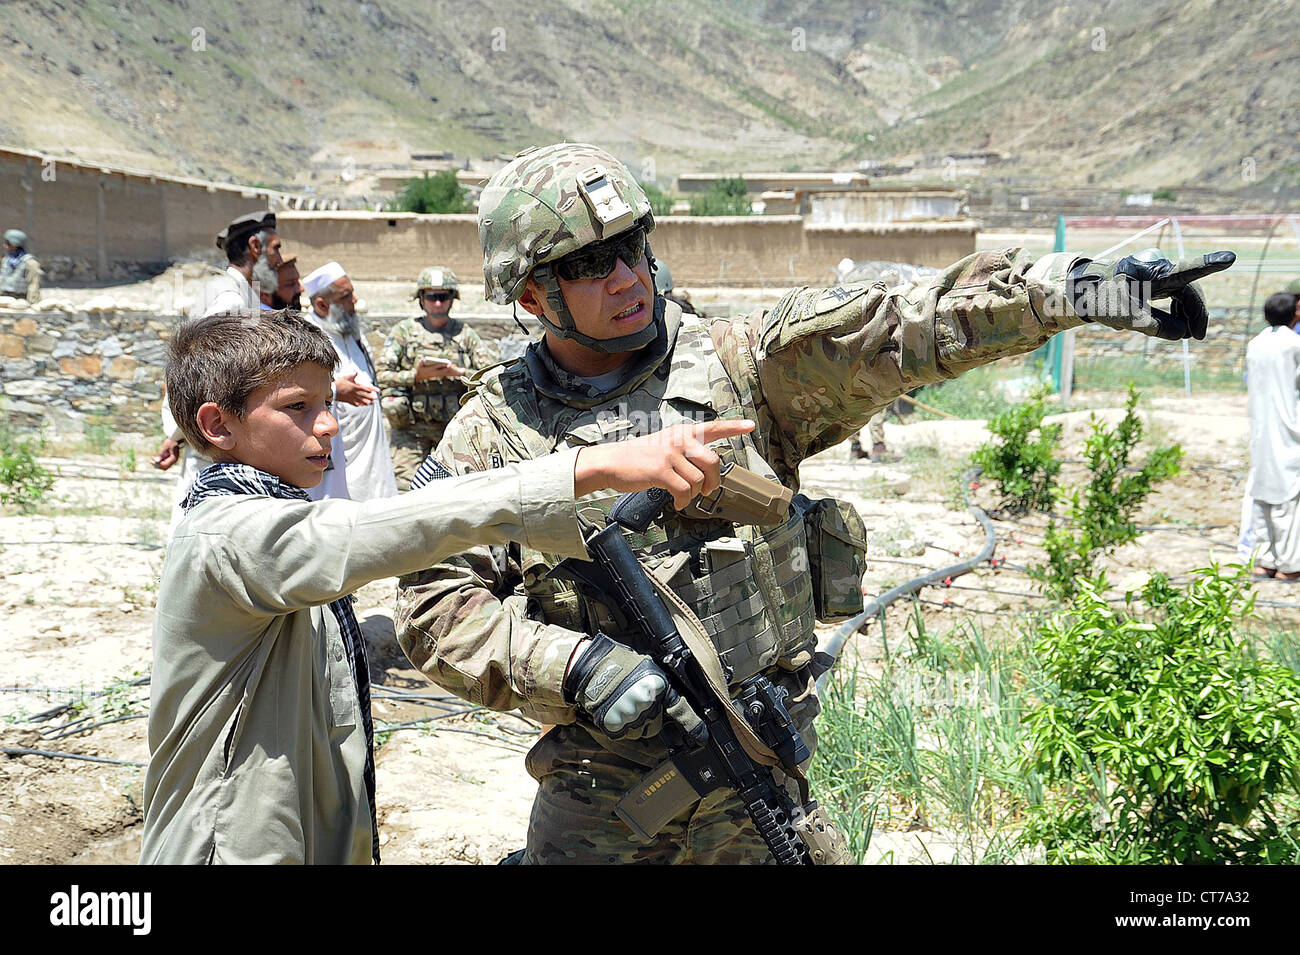 A US Army soldier speaks to a local teenager about the location of his school during a visit to the Central Kunar Demo Farm June 21, 2012 in Kunar, Afghanistan. The soldier is part of the Provincial Reconstruction Team Kunar agricultural section who assiss the demo farm to show the farmers and other locals nearby more effective ways to cultivate crops. Stock Photo